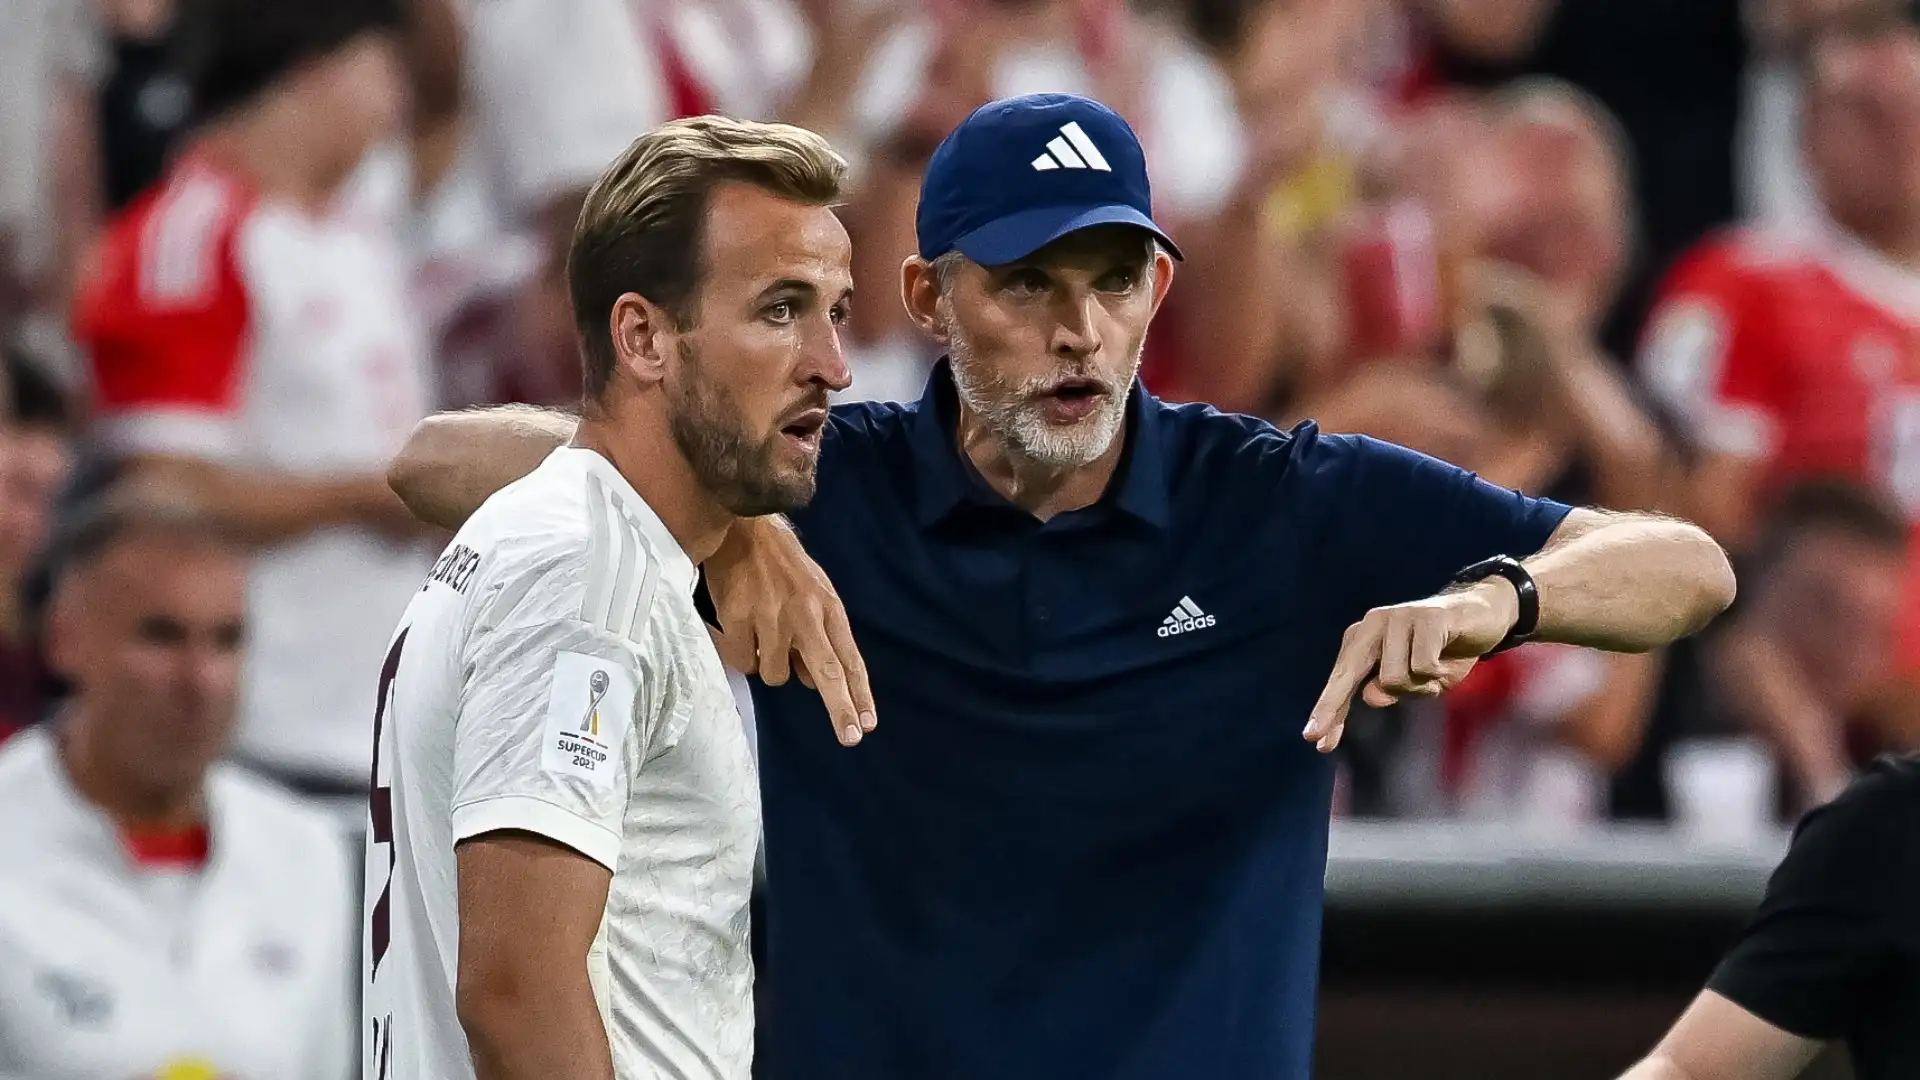 Thomas Tuchel to stay?! Harry Kane, Manuel Neuer and Thomas Muller among Bayern stars pushing for German giants to prevent coach's departure after being rejected by several candidates